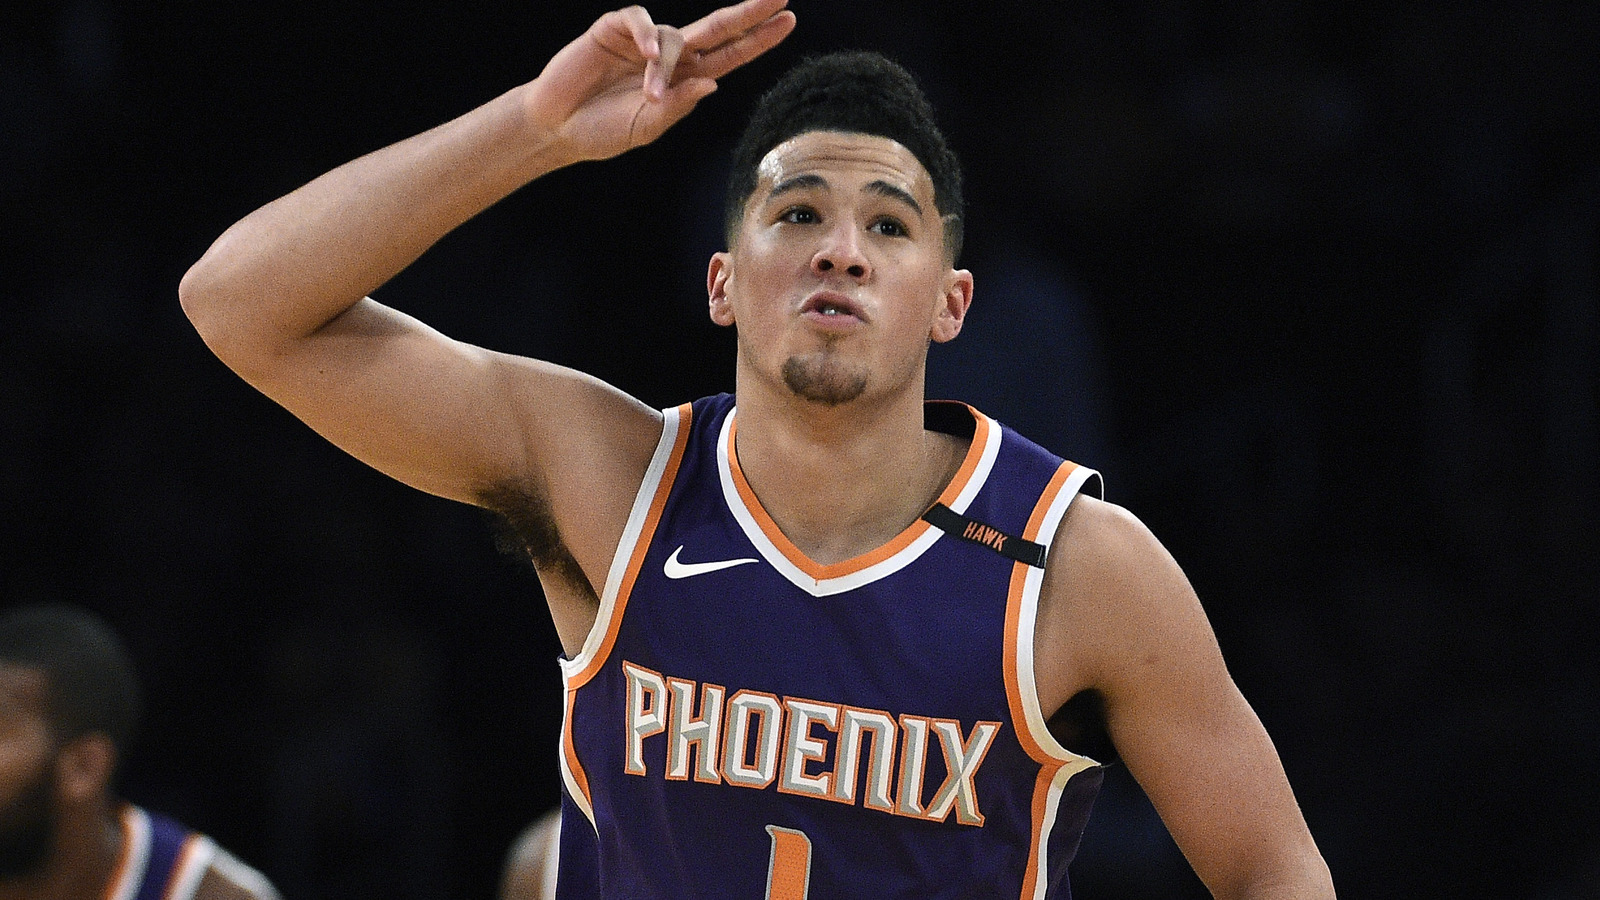 Devin Booker is expanding his game beyond getting buckets.